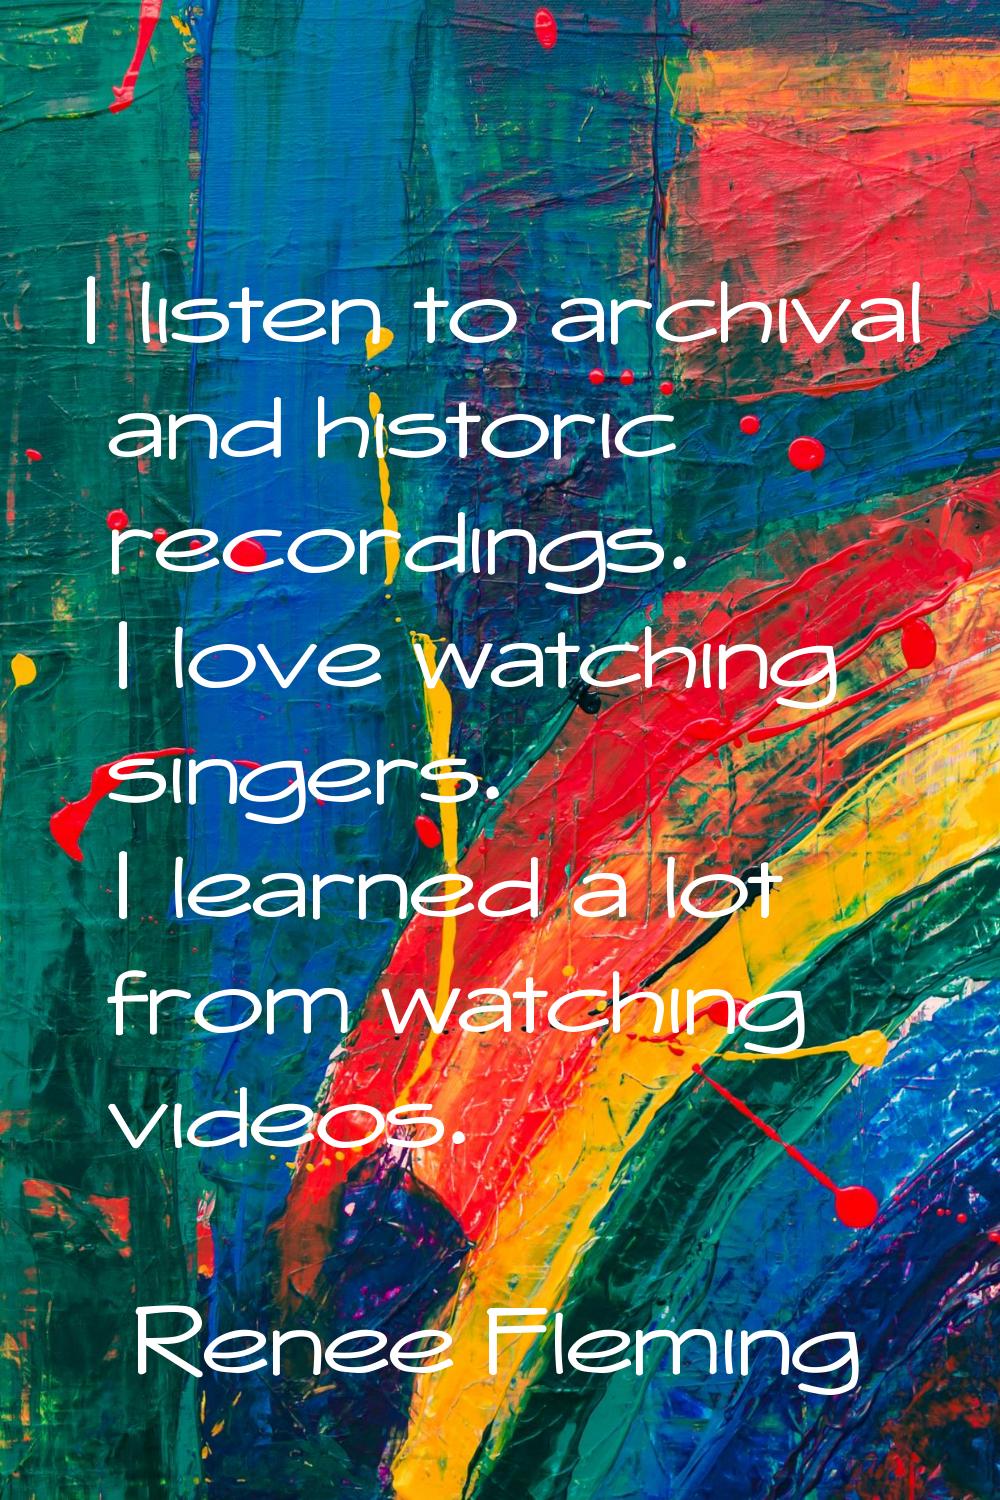 I listen to archival and historic recordings. I love watching singers. I learned a lot from watchin